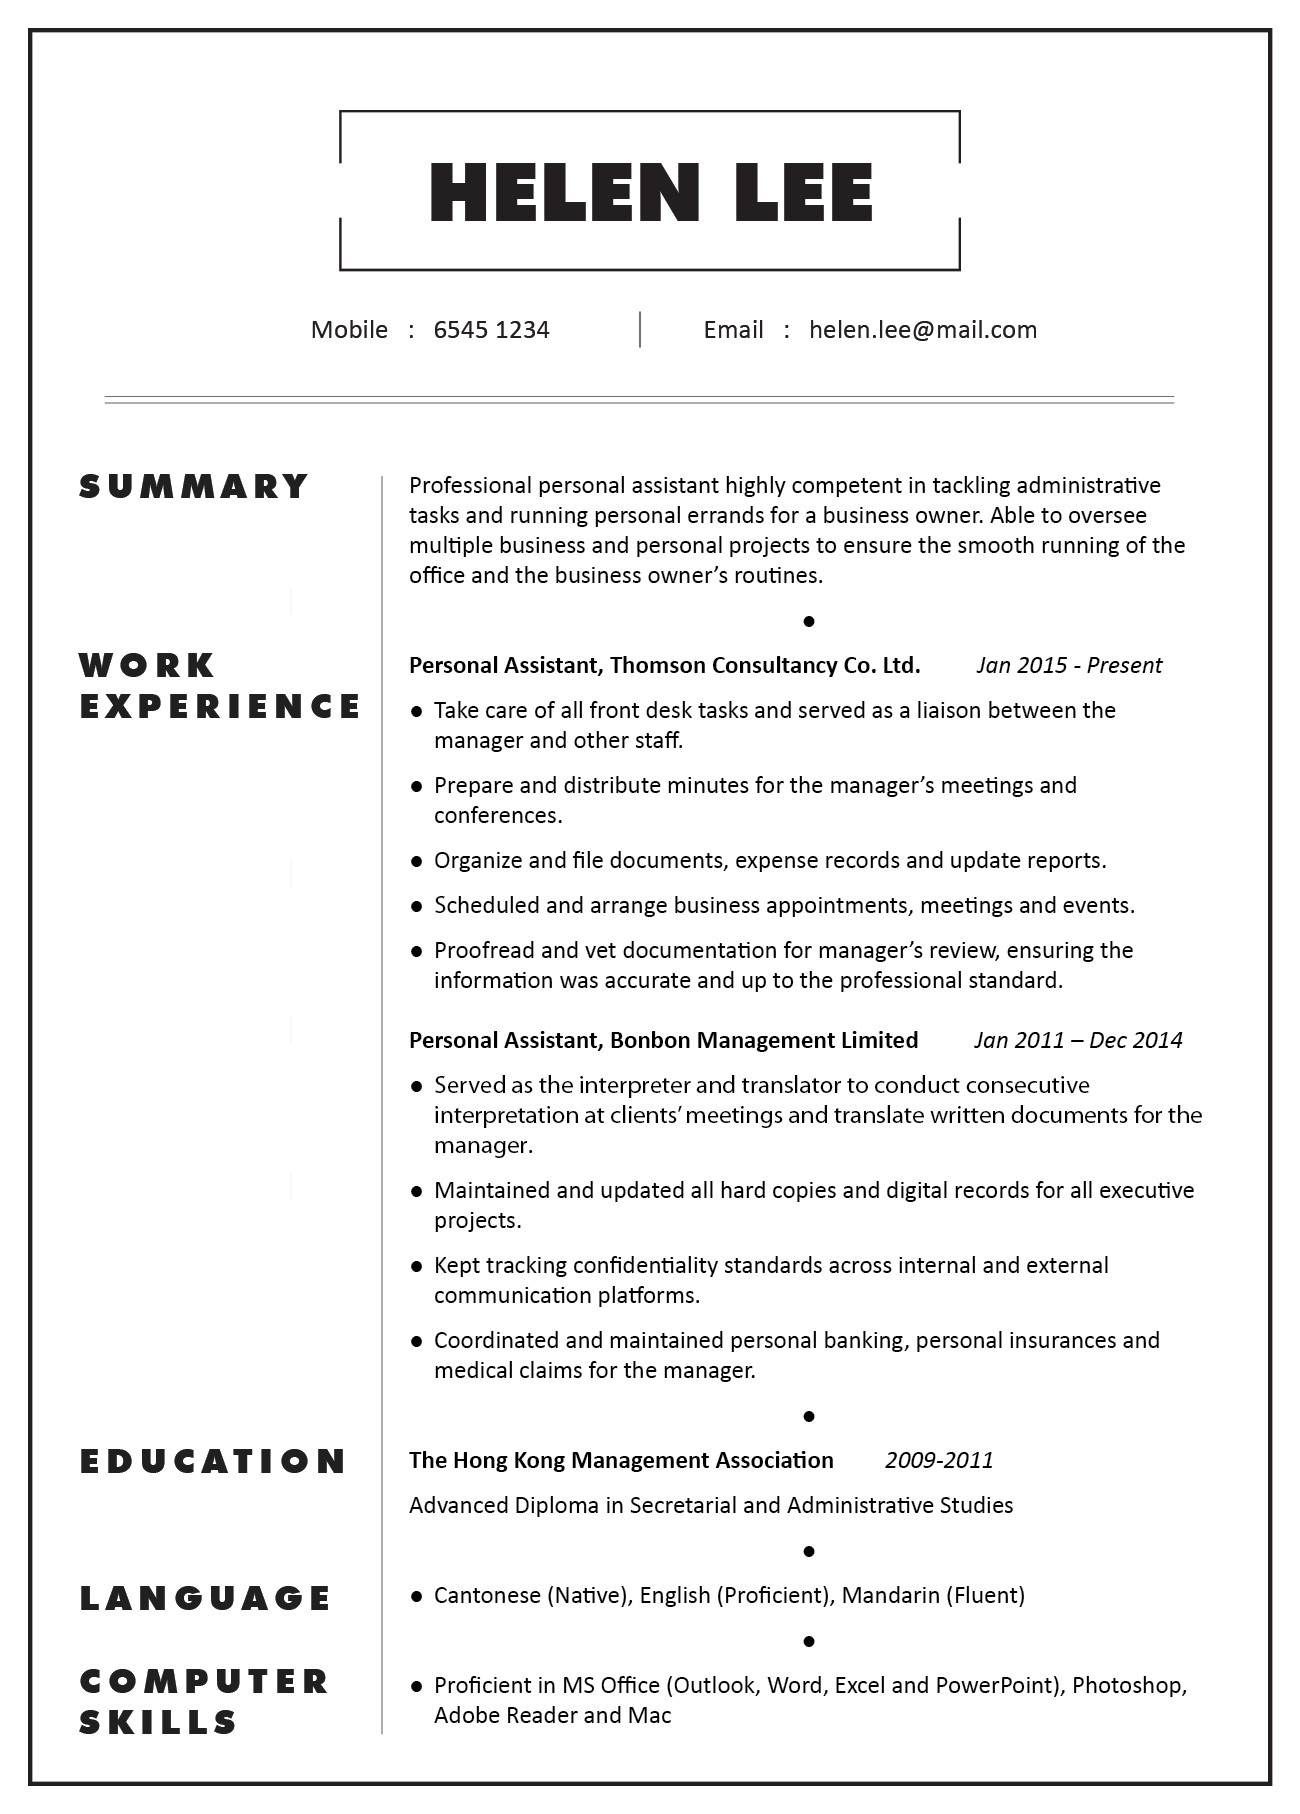 Resume Samples Of A Personal assistant Cv & Profile Sample â Personal assistant Jobsdb Hong Kong